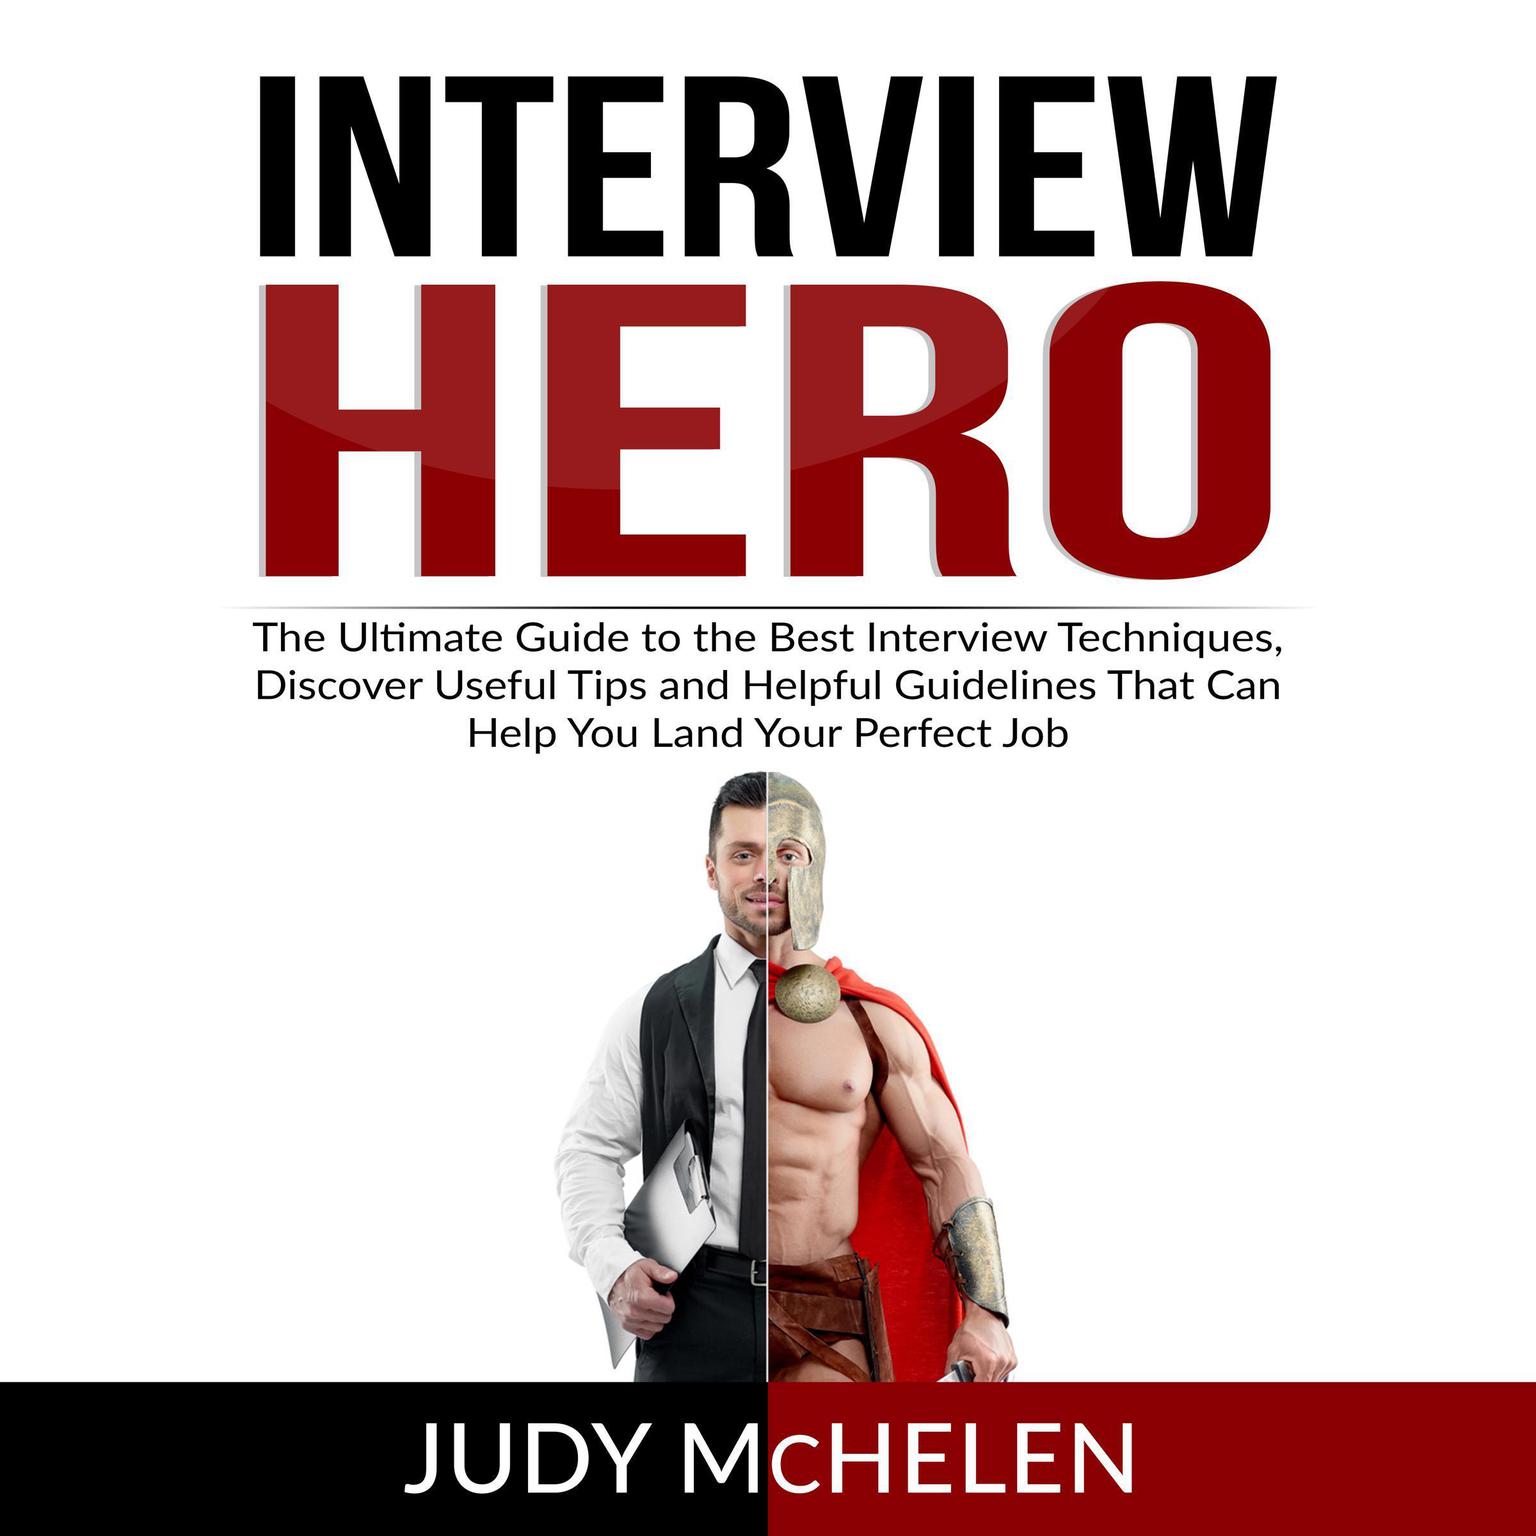 Interview Hero: The Ultimate Guide to the Best Interview Techniques, Discover Useful Tips and Helpful Guidelines That Can Help You Land Your Perfect Job Audiobook, by Judy McHelen